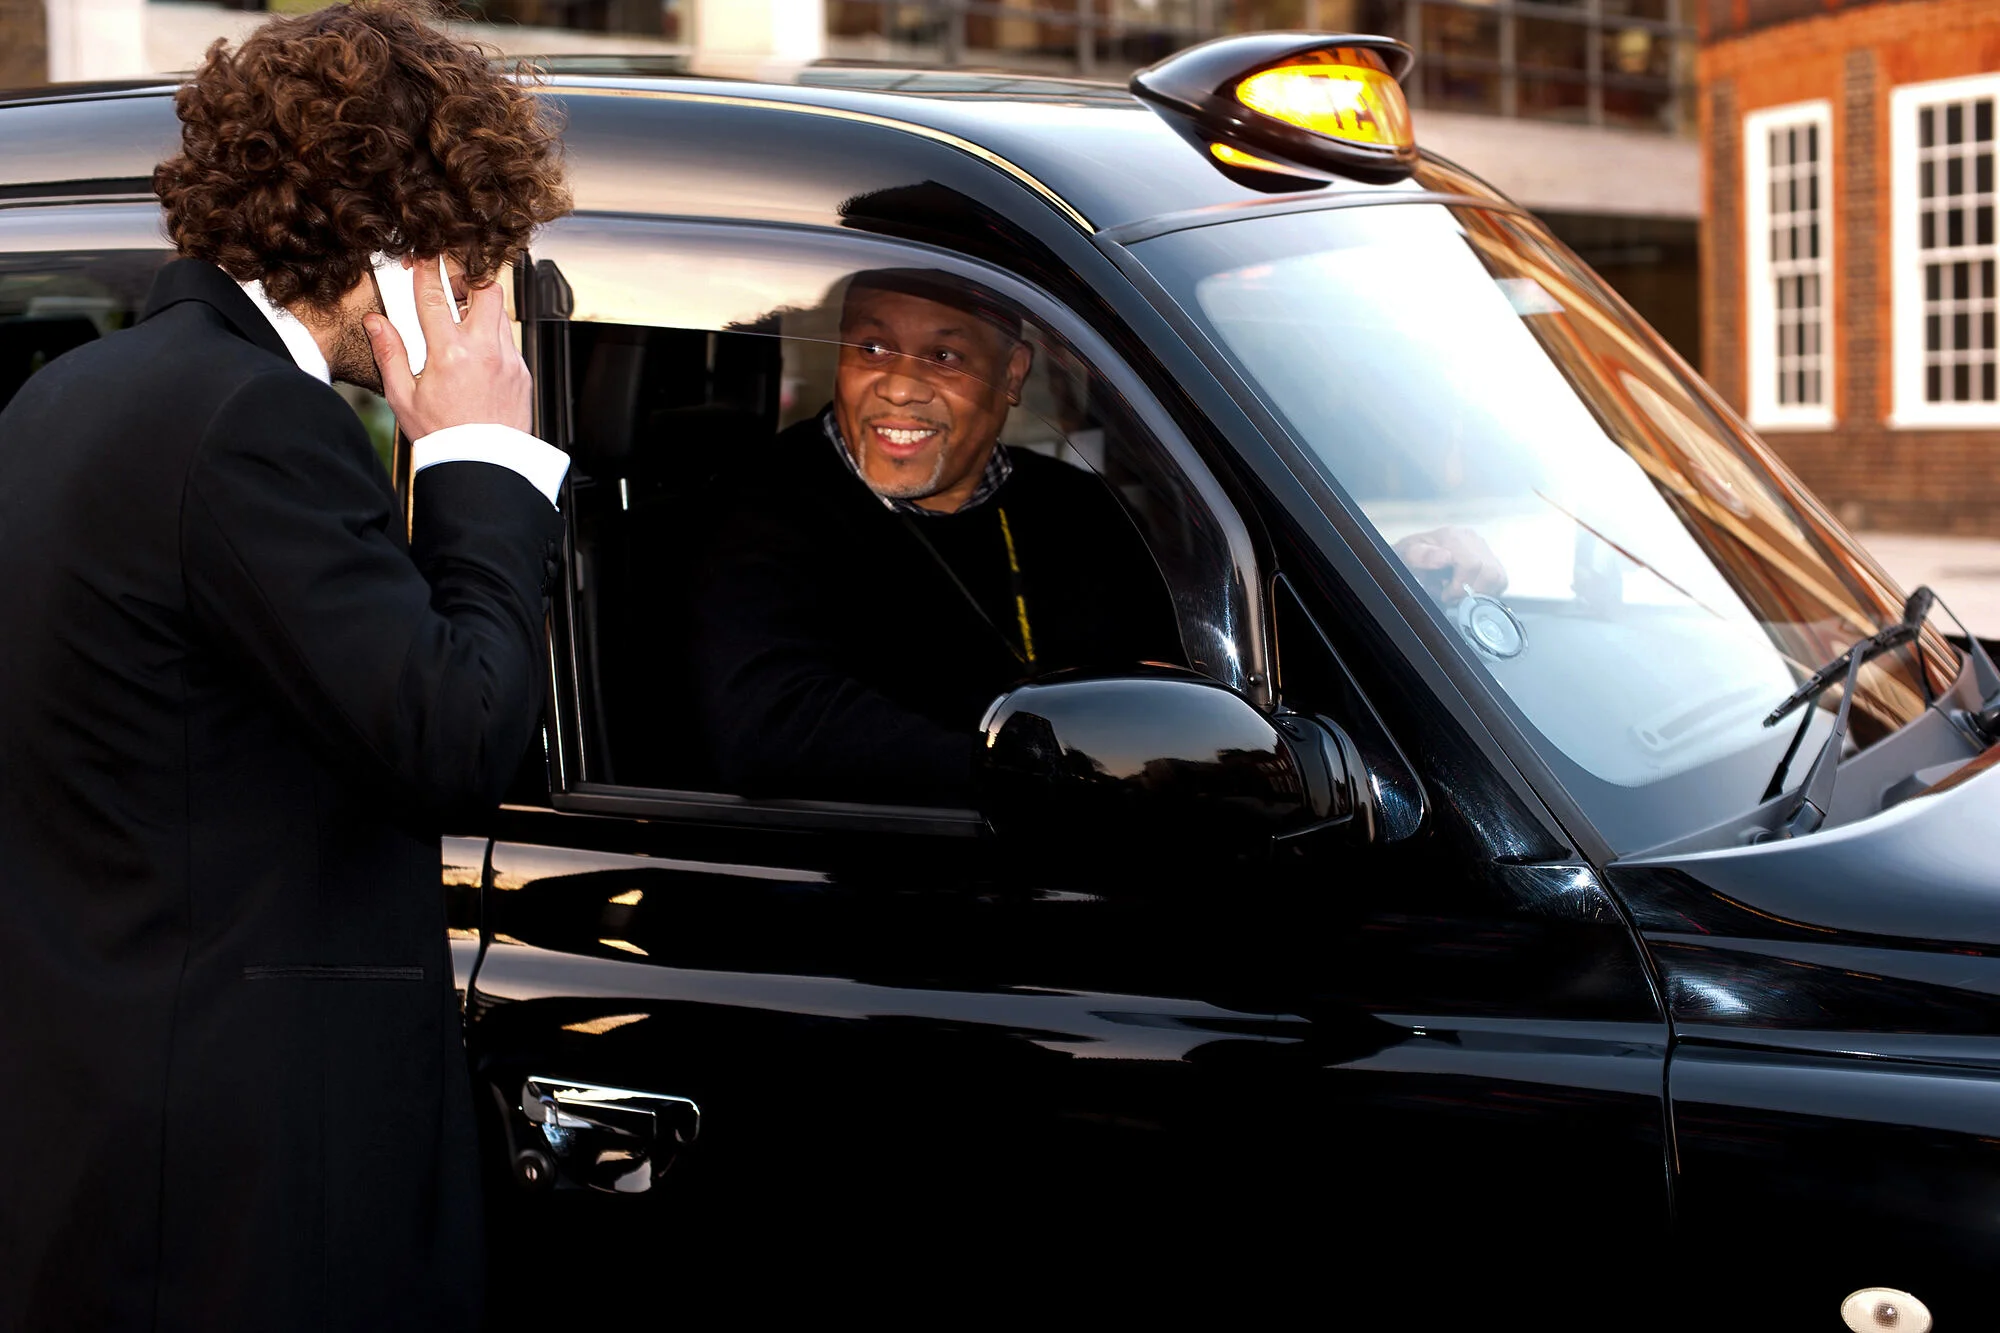 Taxi driver talking to a passenger outside his vehicle